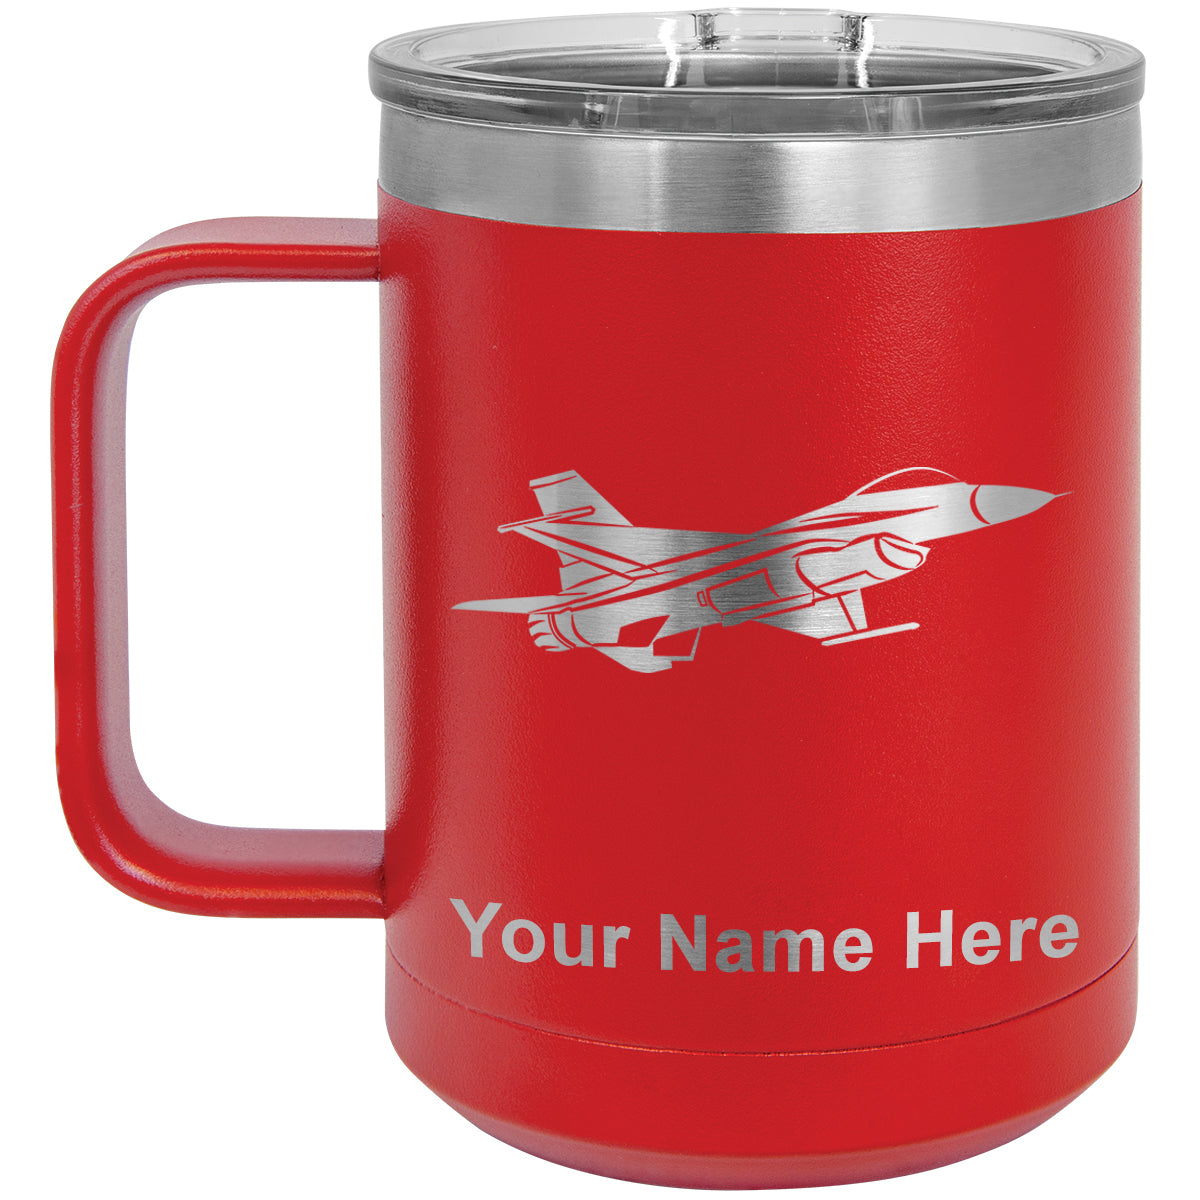 15oz Vacuum Insulated Coffee Mug, Fighter Jet 1, Personalized Engraving Included